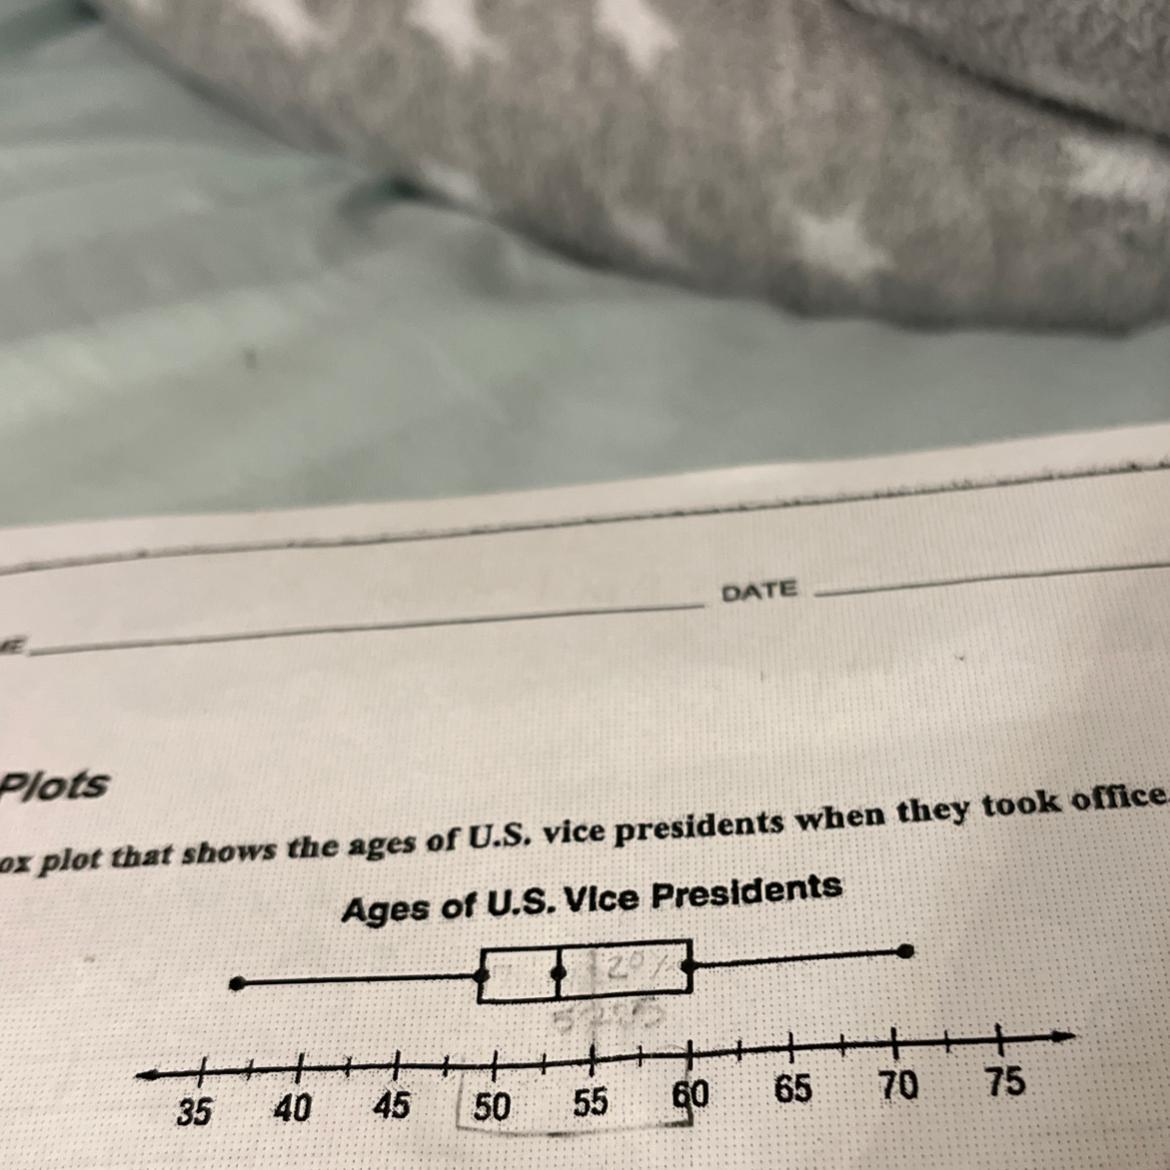 What Percent Of U.S. Vice Presidents Were At Least 60 Years Old When They Took Office? Explain How You